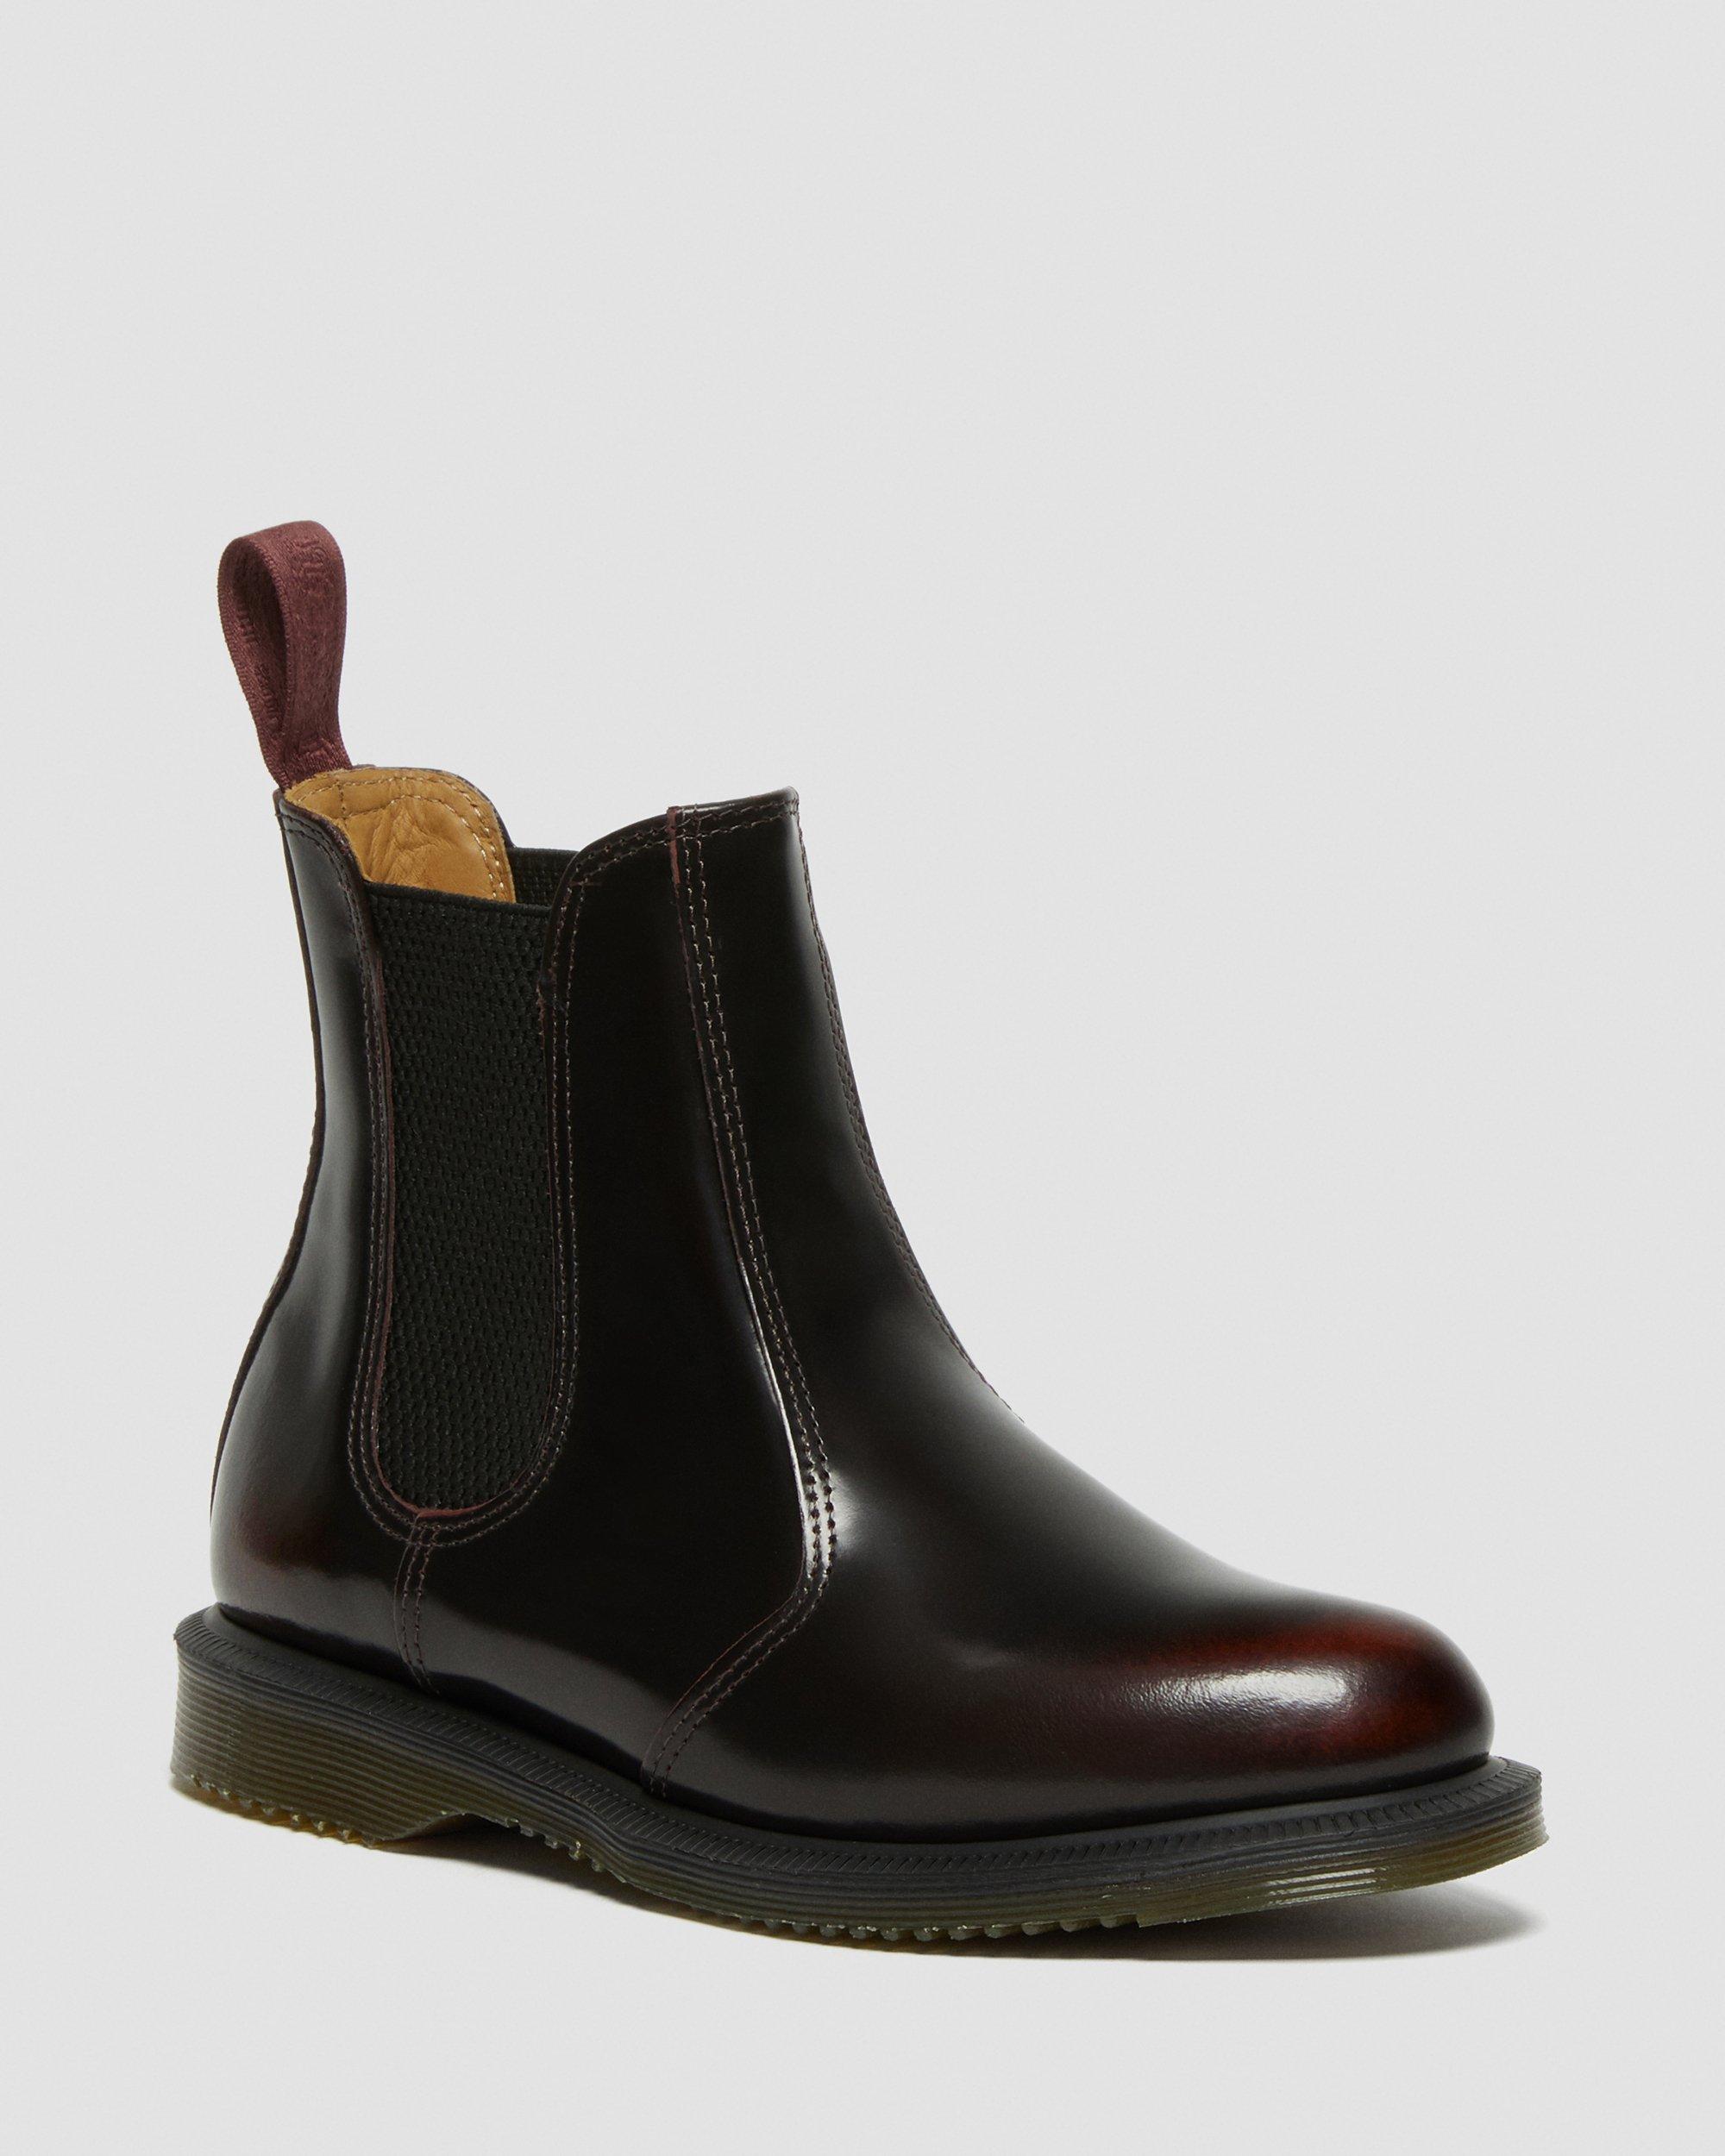 FLORA ARCADIA LEATHER CHELSEA BOOTS in Cherry Red | Dr. Martens